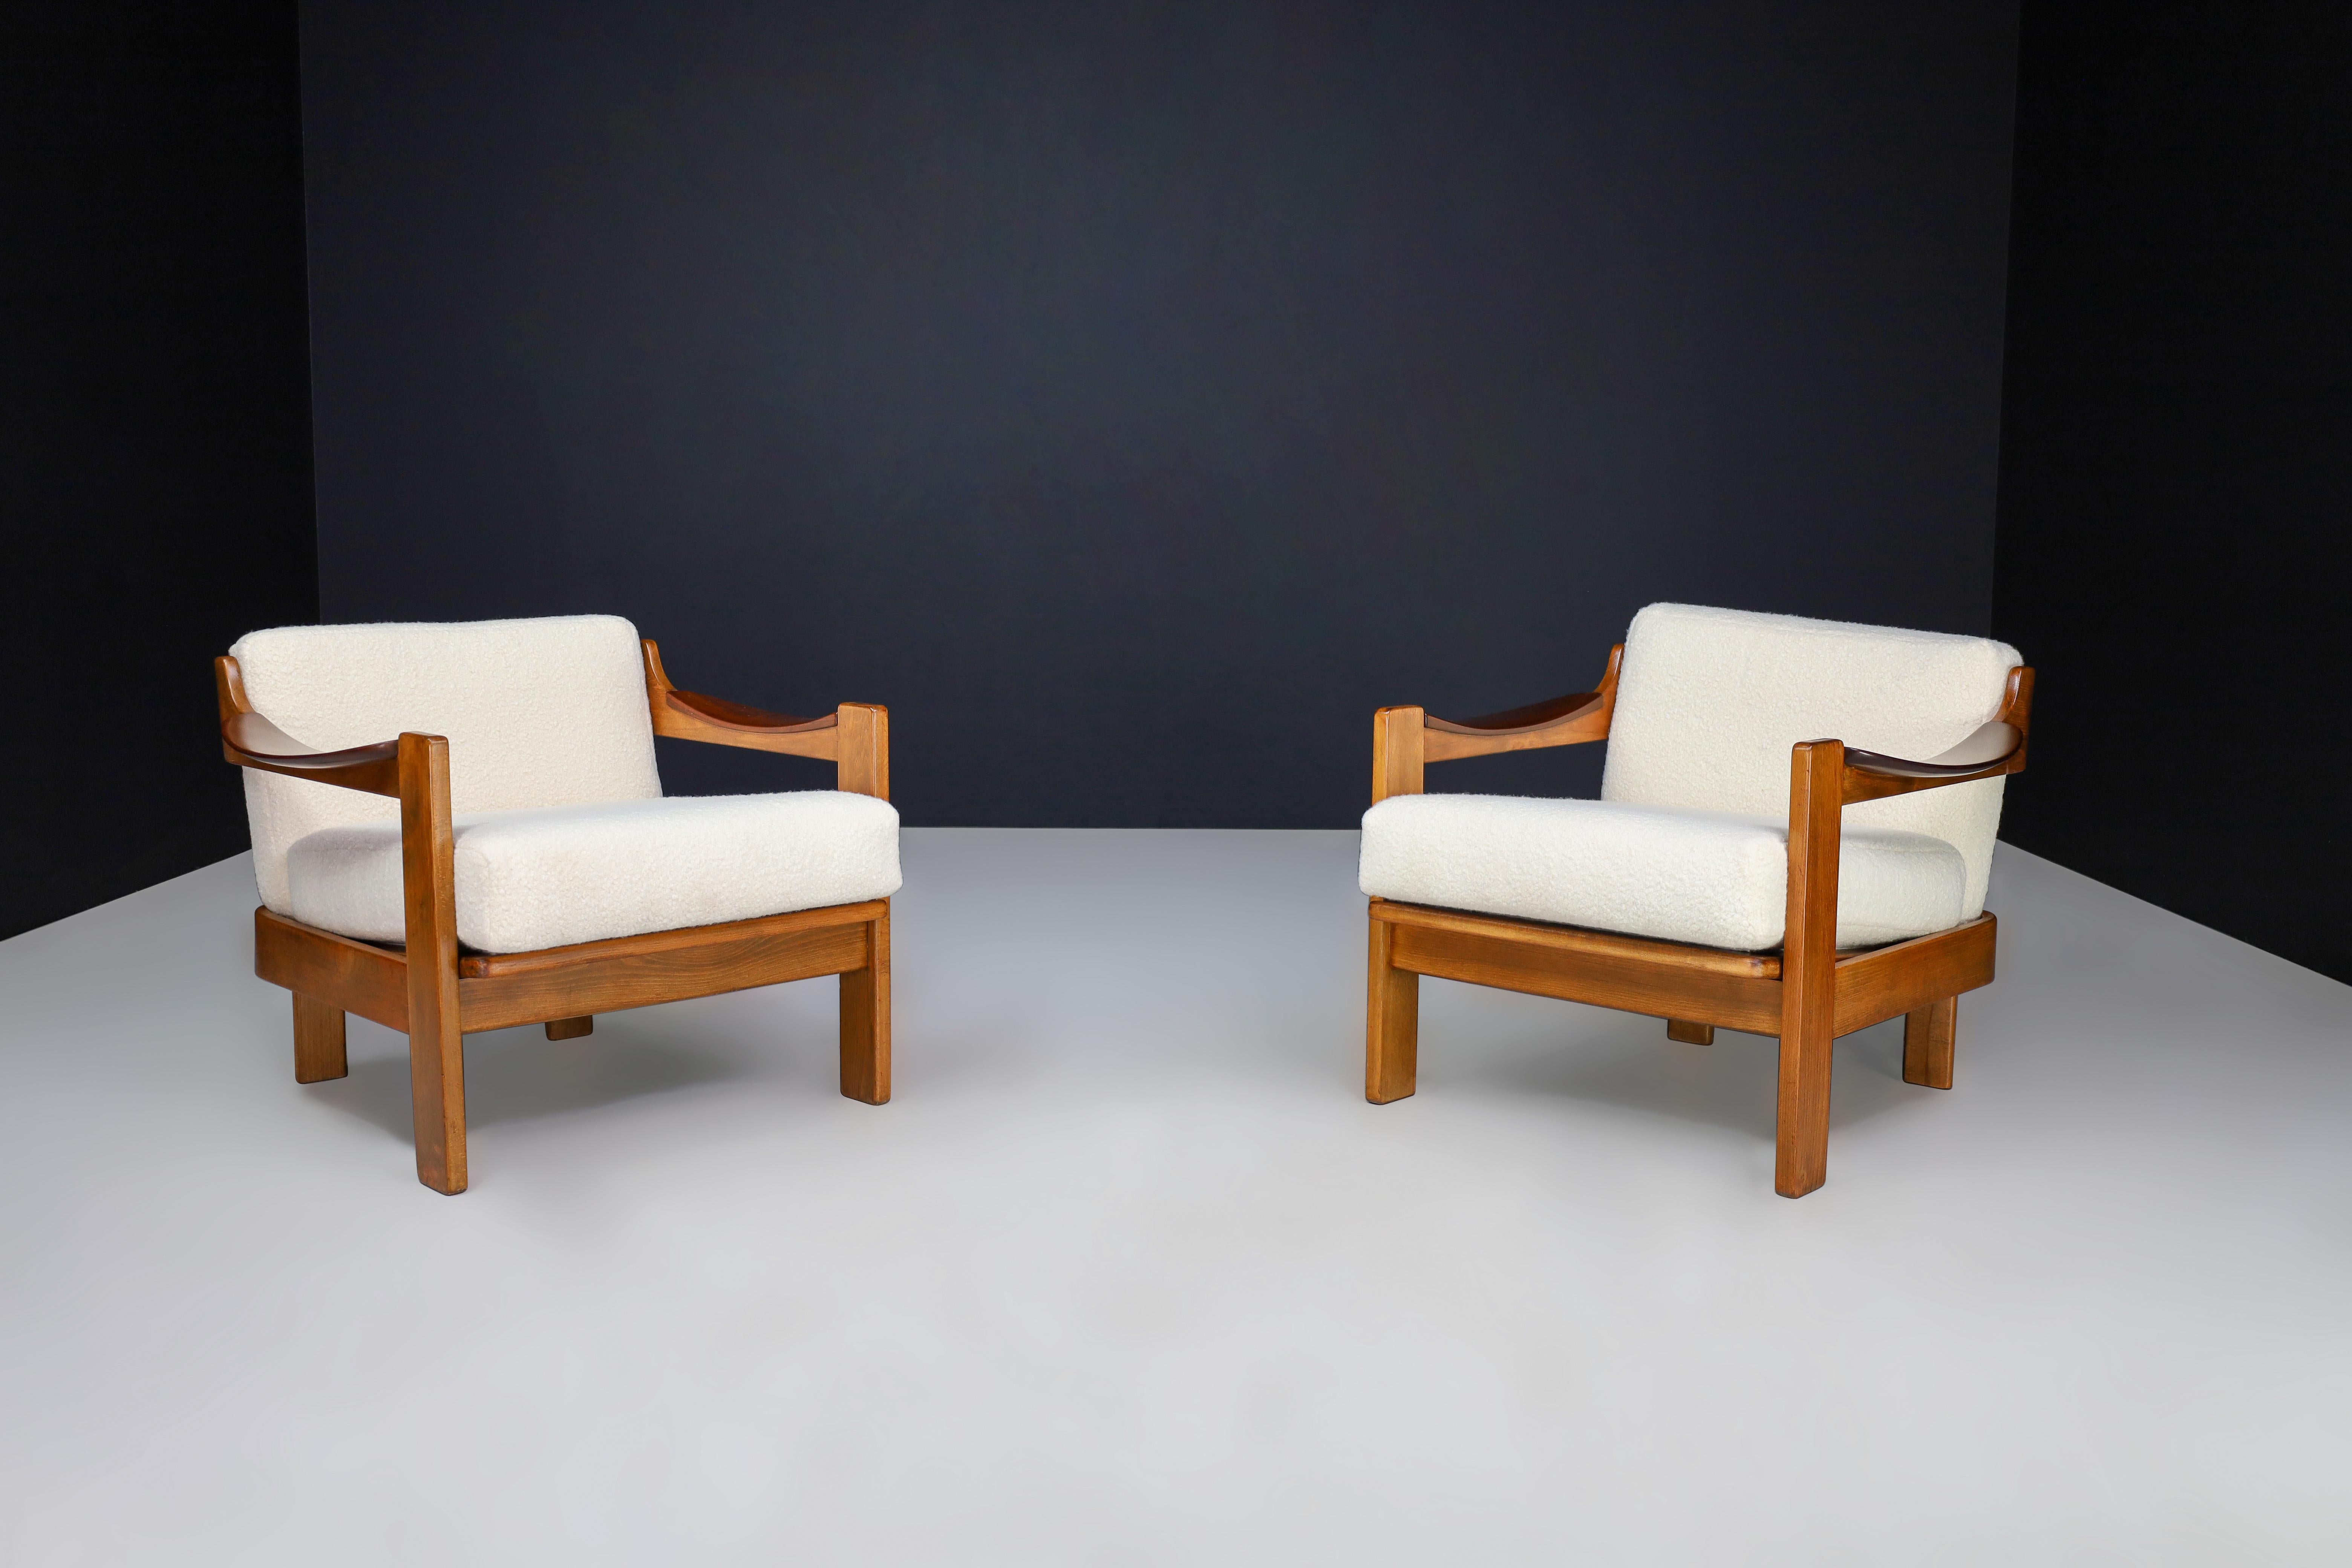 A.G Barcelona Walnut Armchairs with Bouclé Fabric, Spain 1960s 

Mid-century walnut armchairs or lounge chairs designed and manufactured by A.G Barcelona in Spain during the 1960s are now available. These chairs have been professionally